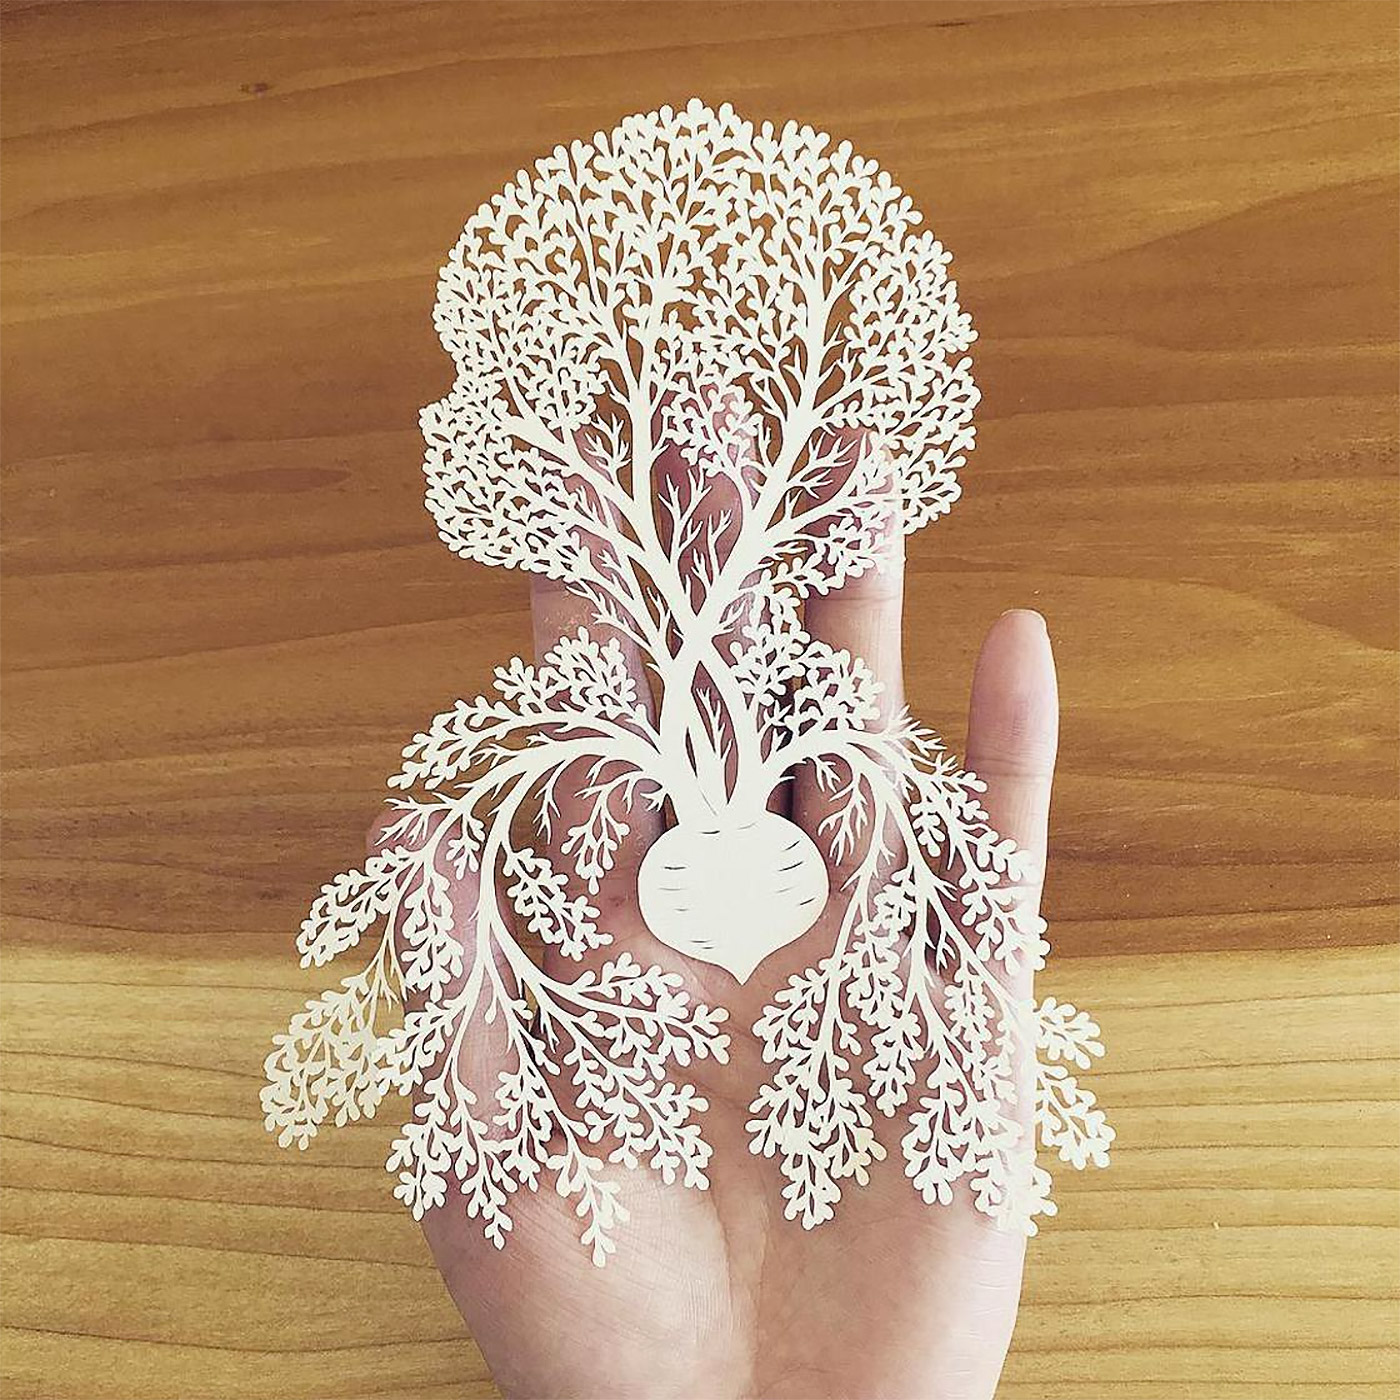  Paper  Cut  Artworks by Kanako Abe Daily design 